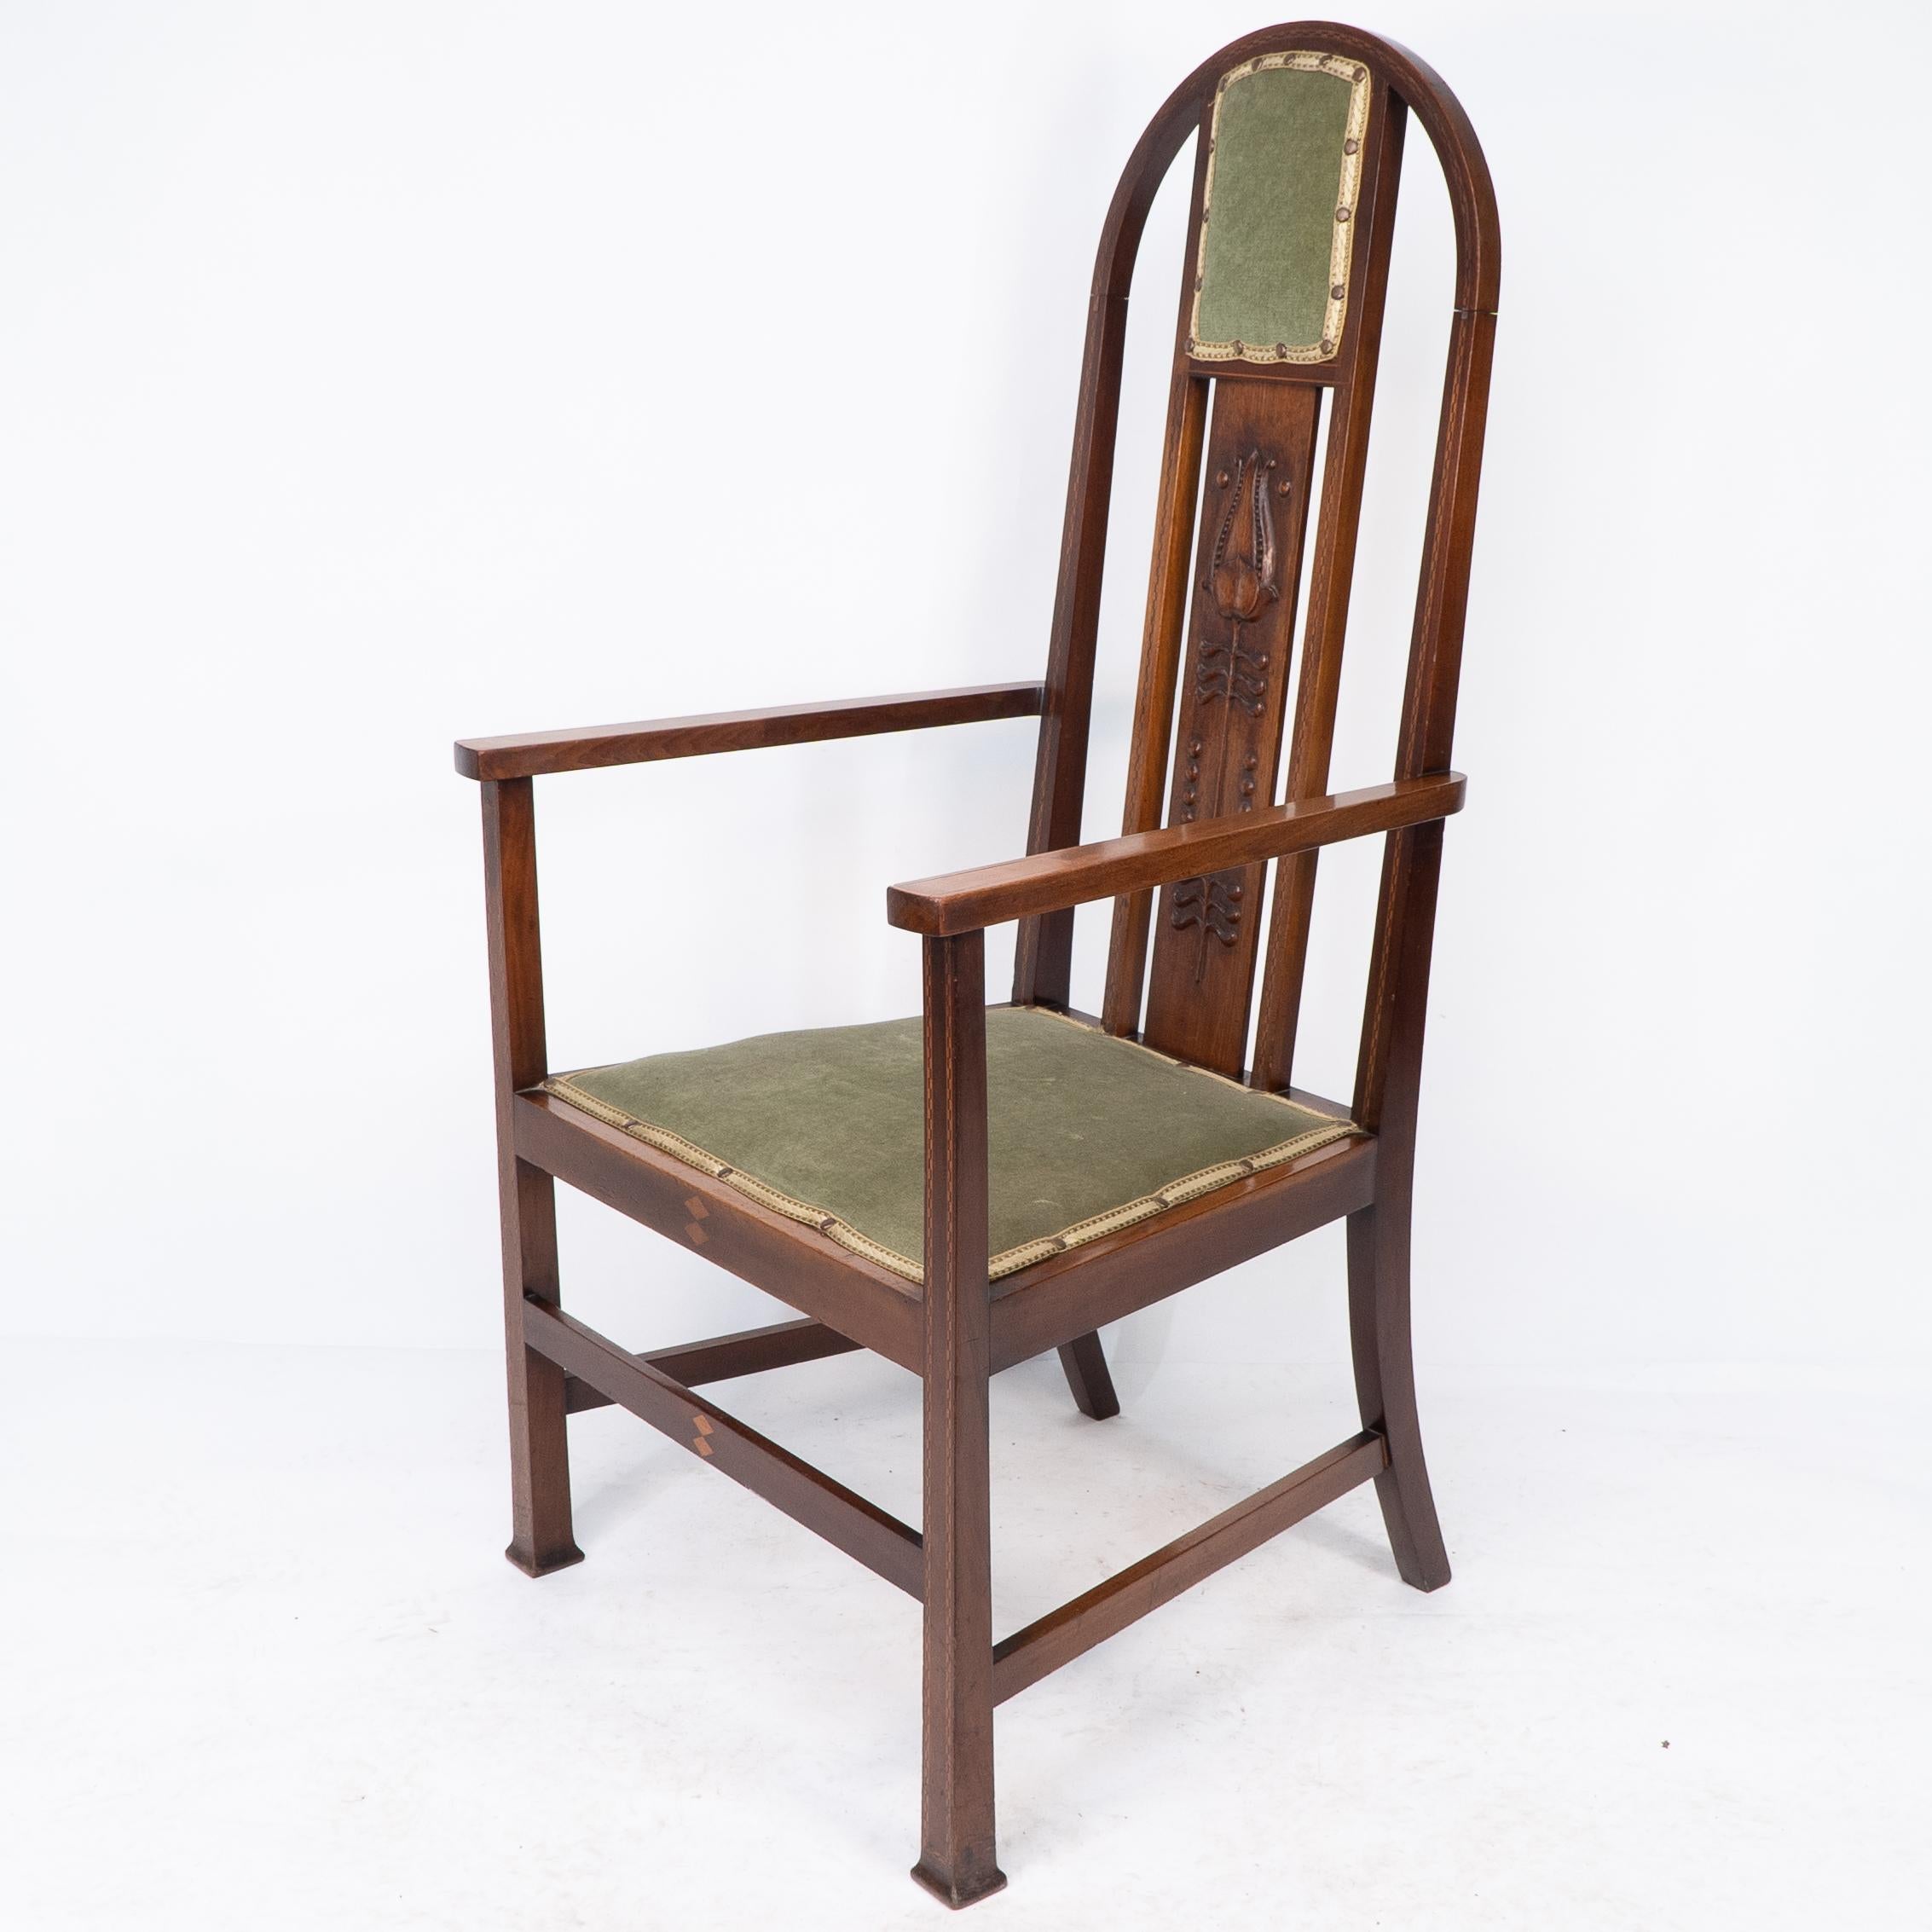 English Liberty and Co attri, A Pair of Arts and Crafts mahogany and Inlaid Armchair For Sale